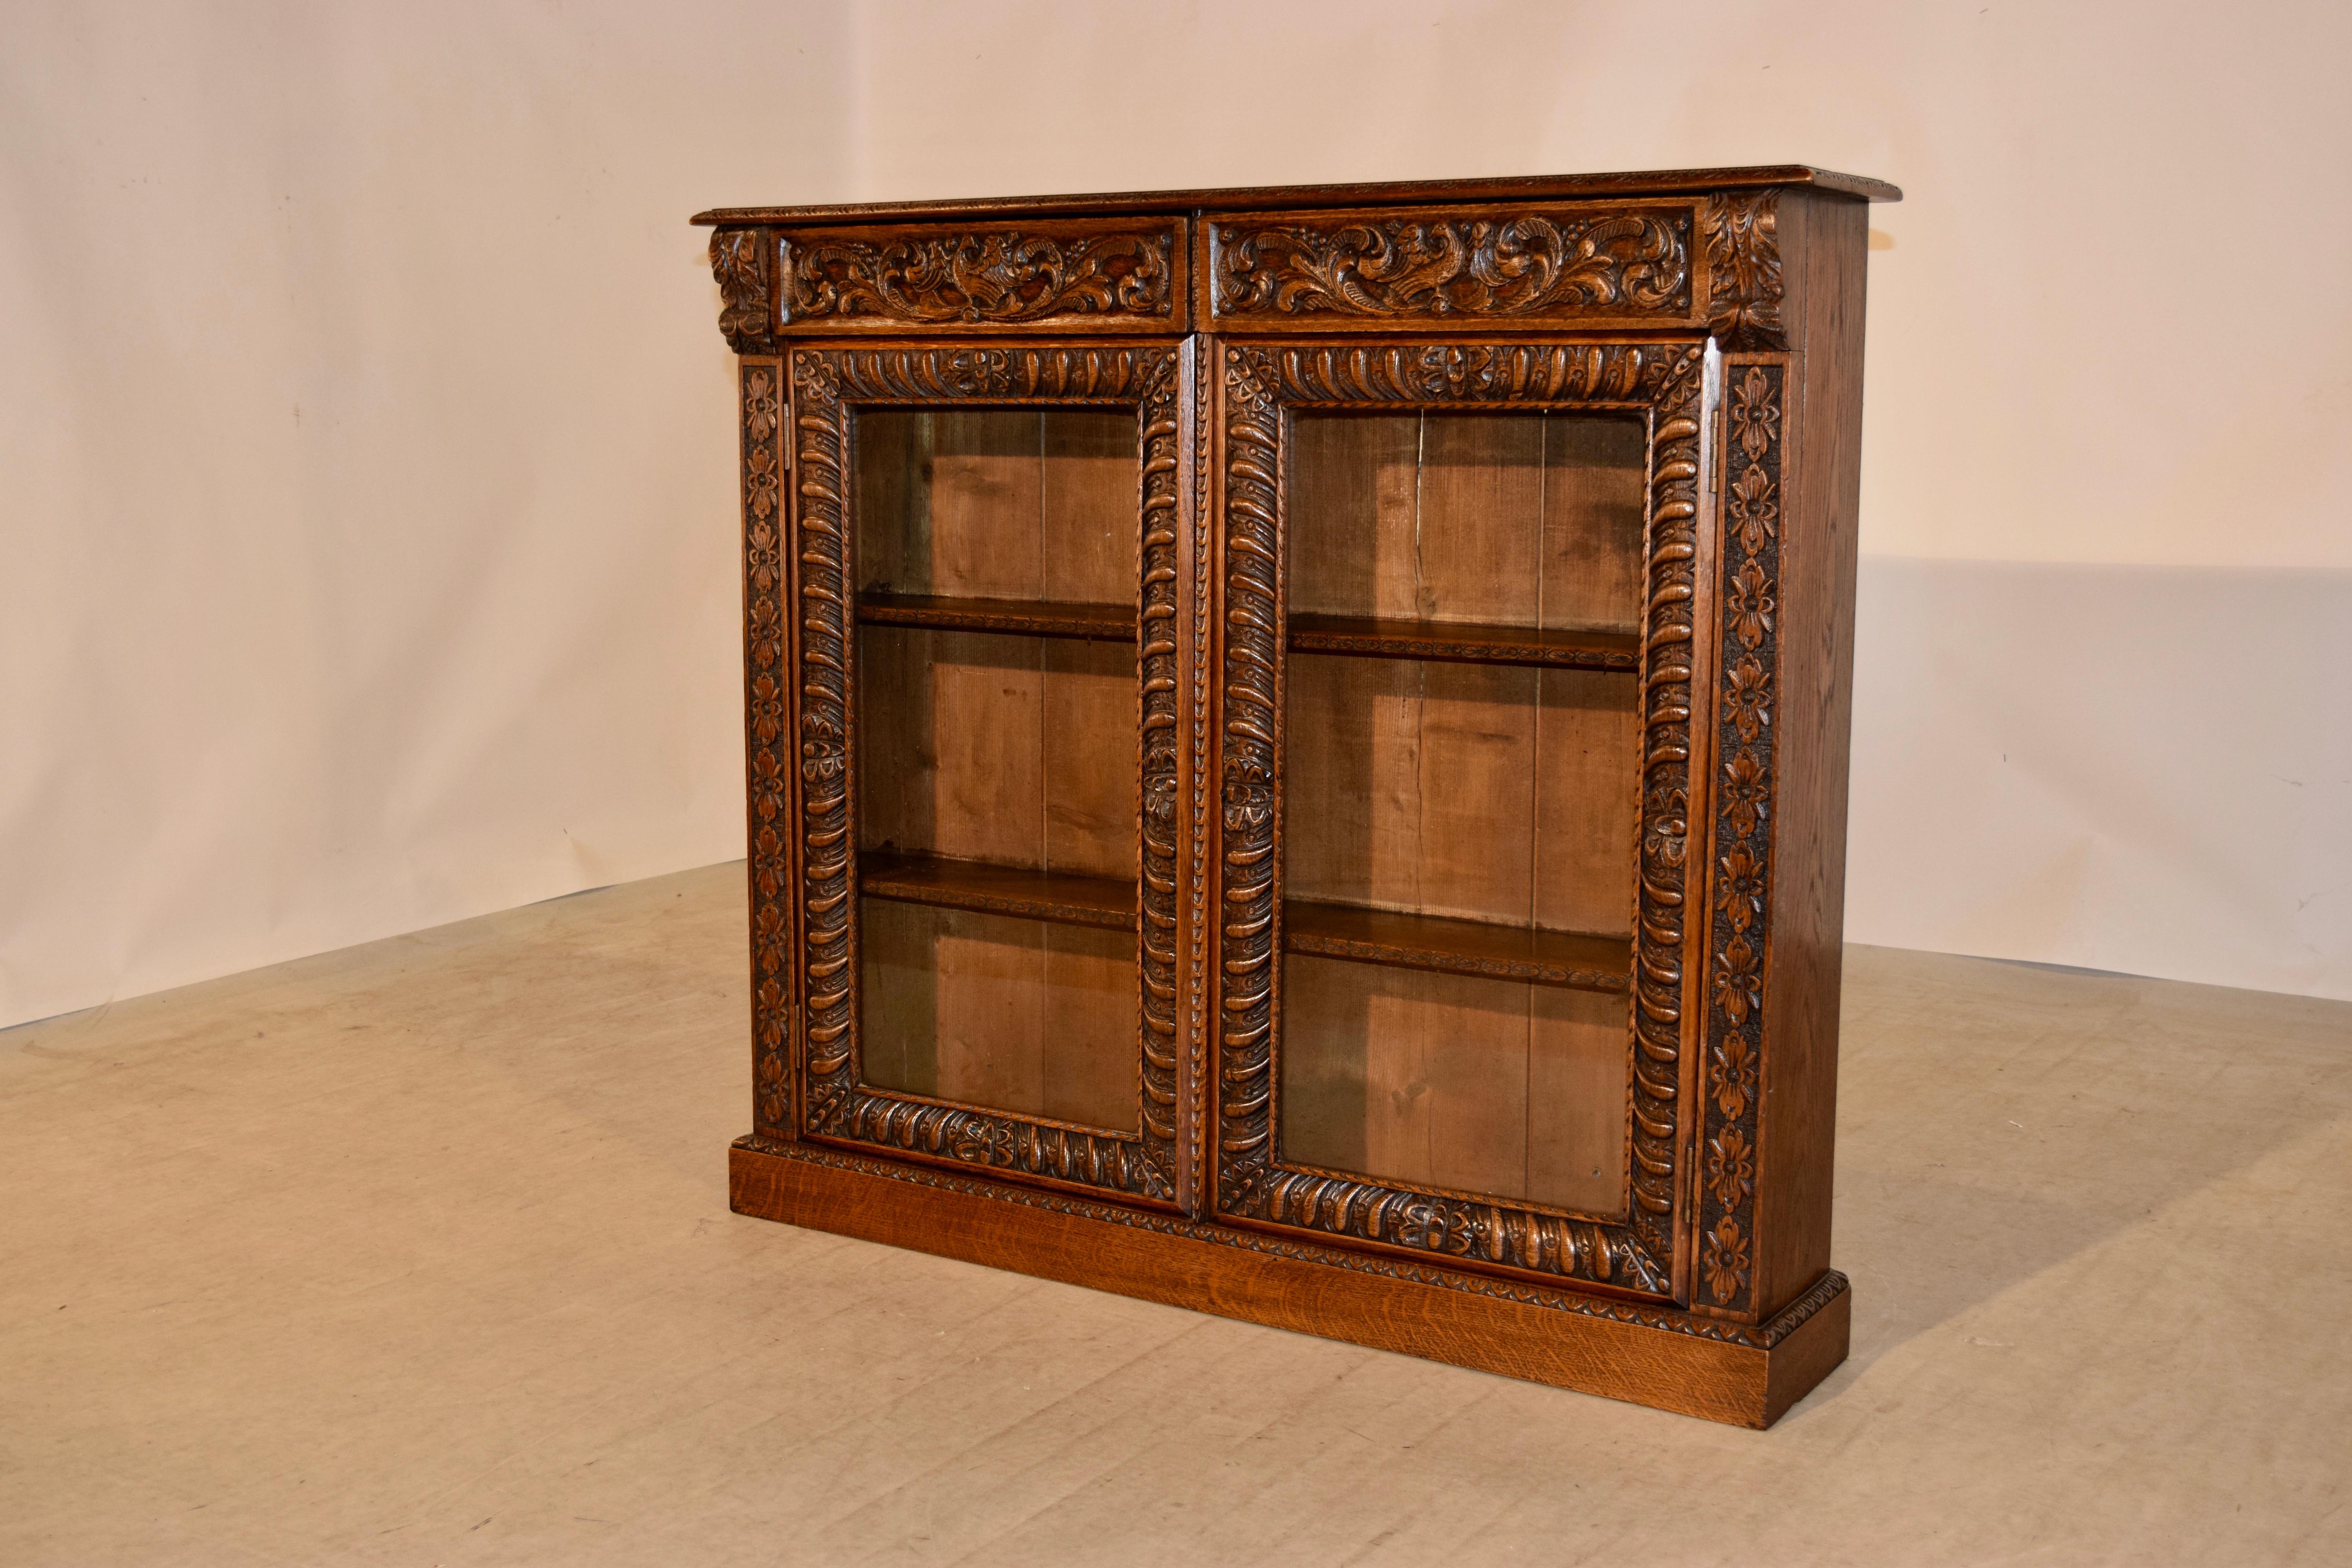 19th century French bookcase made from oak with a beveled and gadrooned edge following down to two drawers, which are wonderfully hand carved decorated over two glazed doors with hand carved framing. Flanked by hand carved side columns. The doors